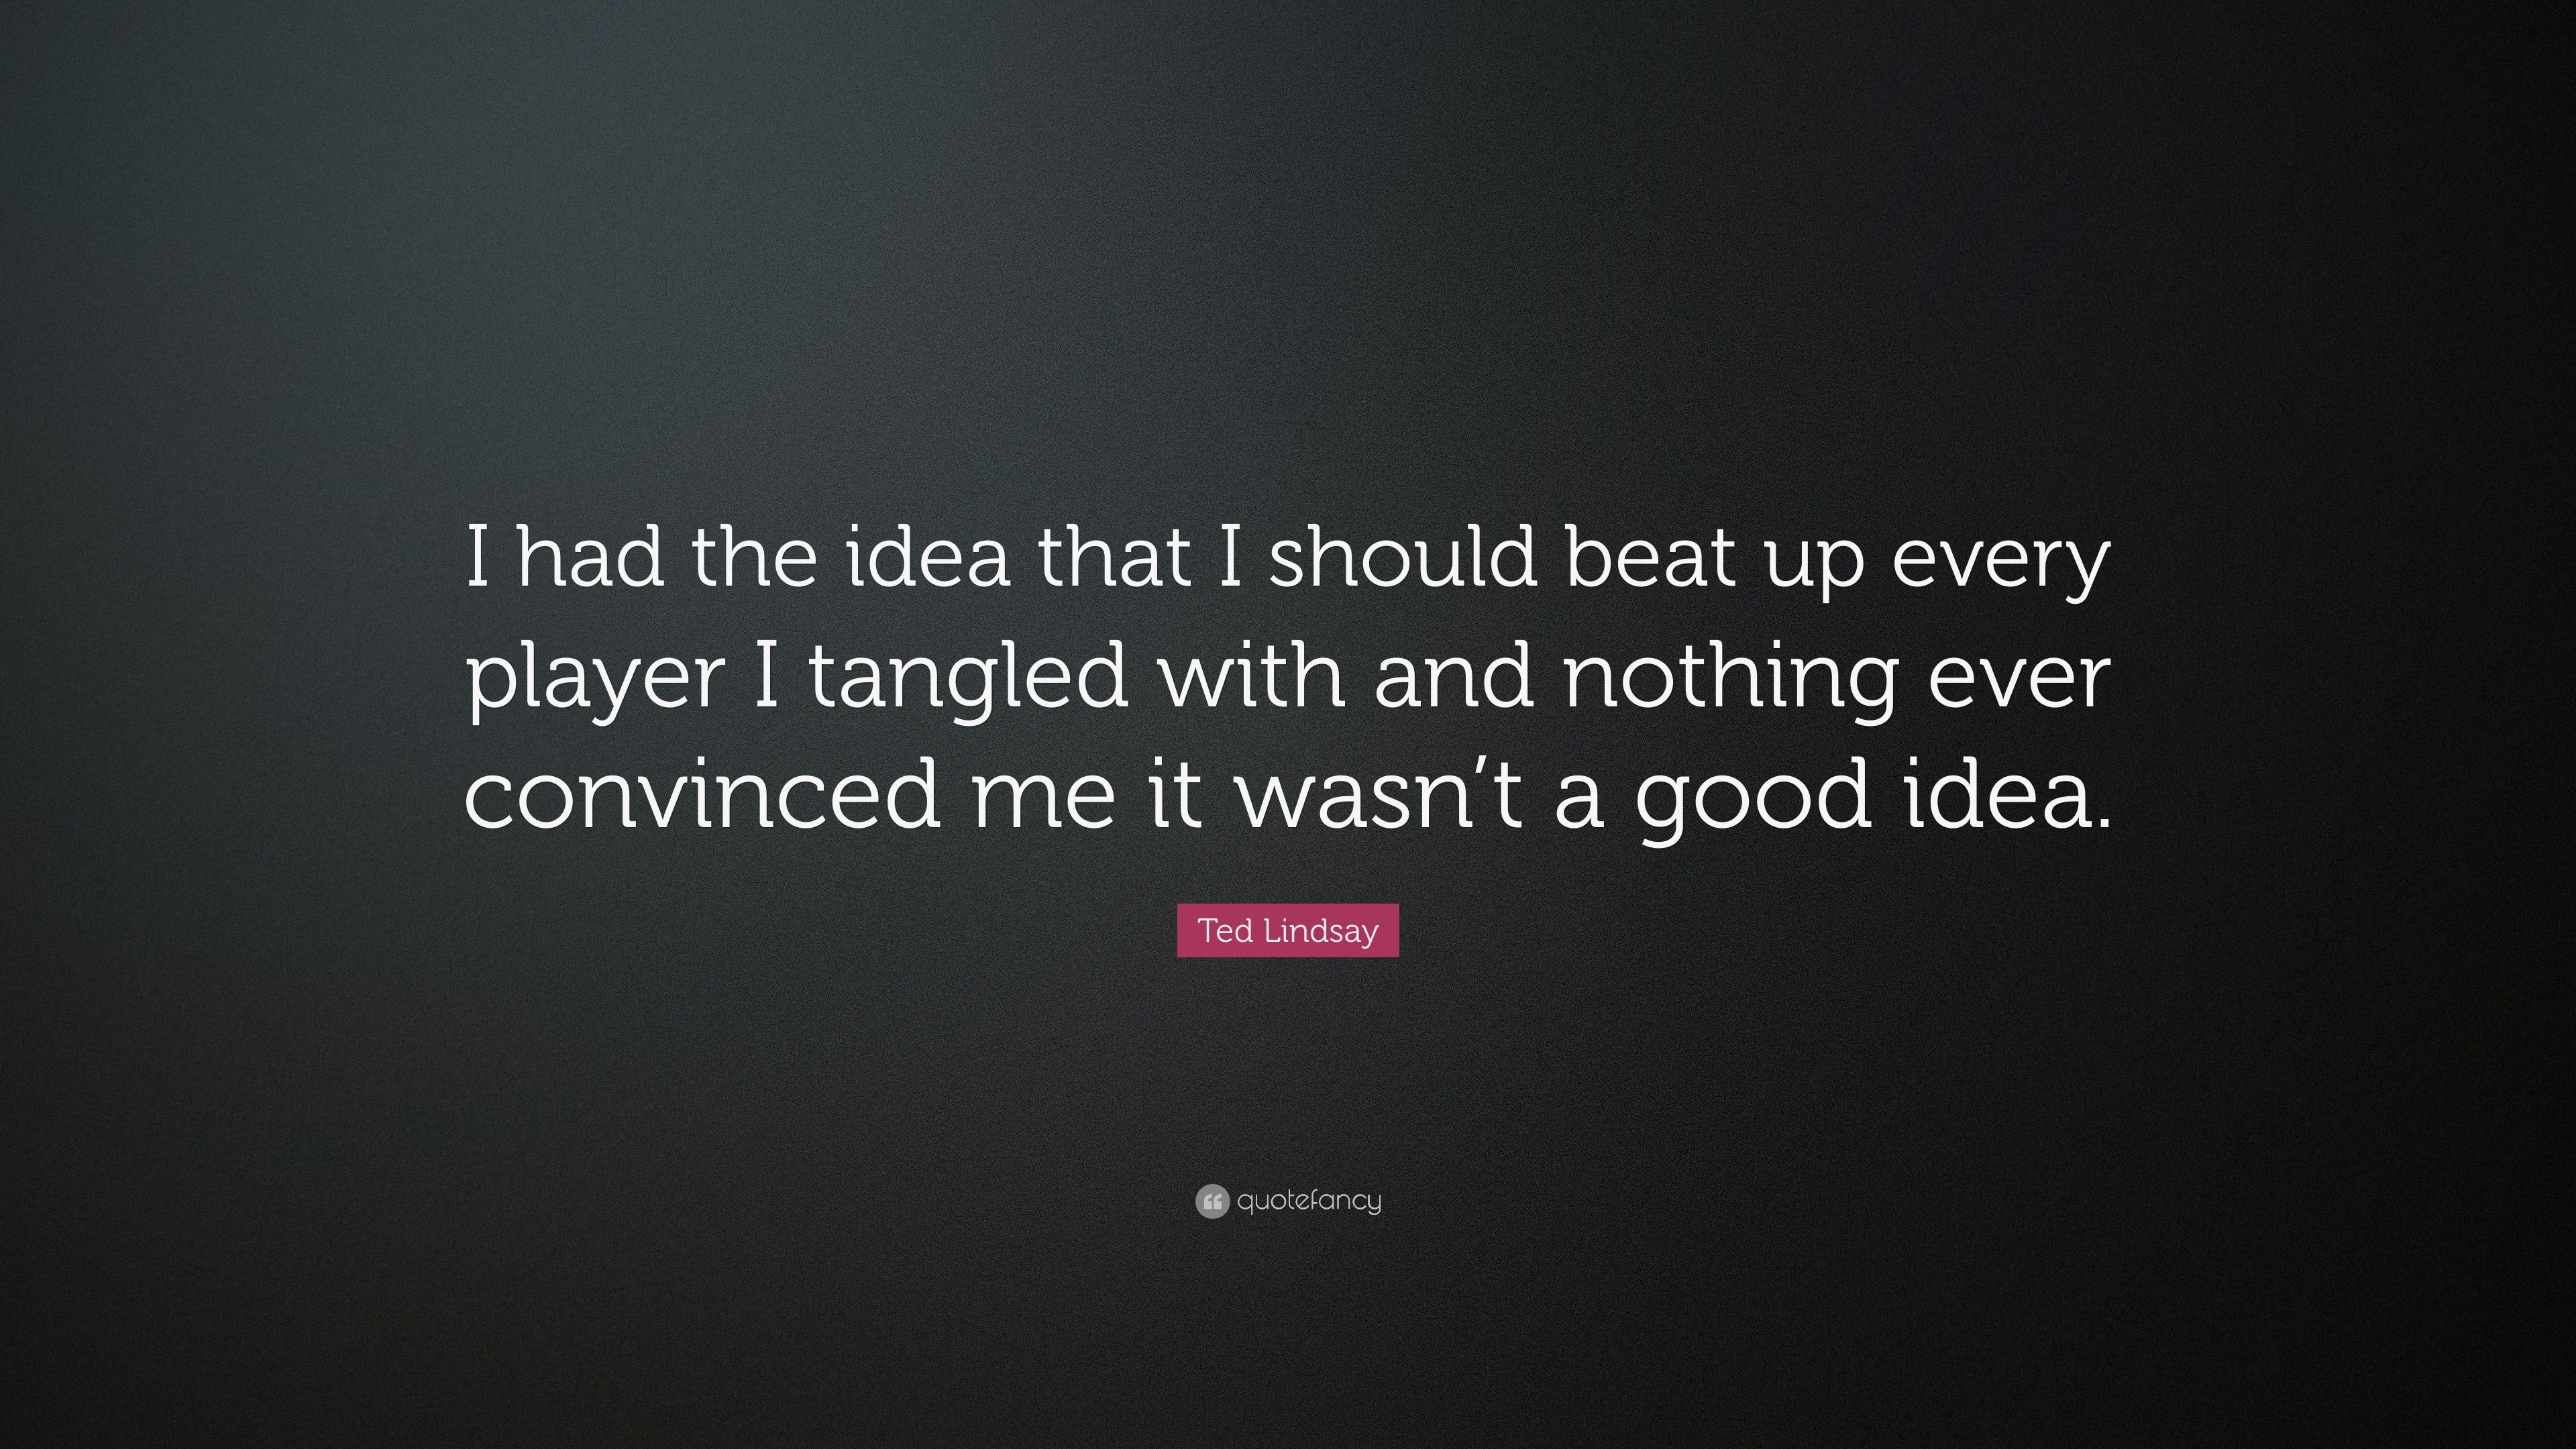 Ted Lindsay Quote: “I had the idea that I should beat up every